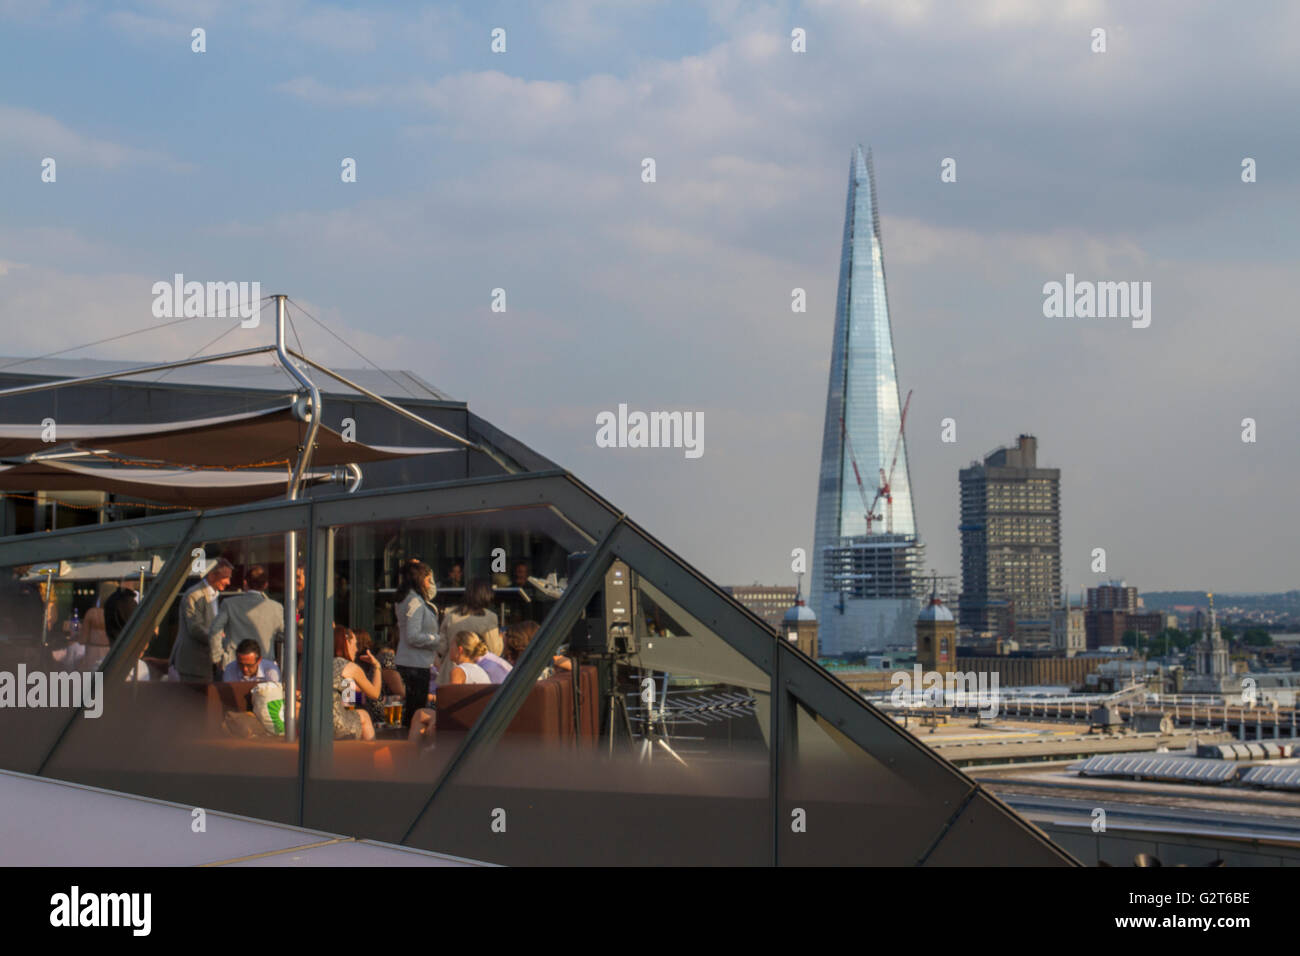 Diners enjoying food and drinks at Madison Rooftop Bar & Restaurant One New Change, With The Shard in The Distance Stock Photo